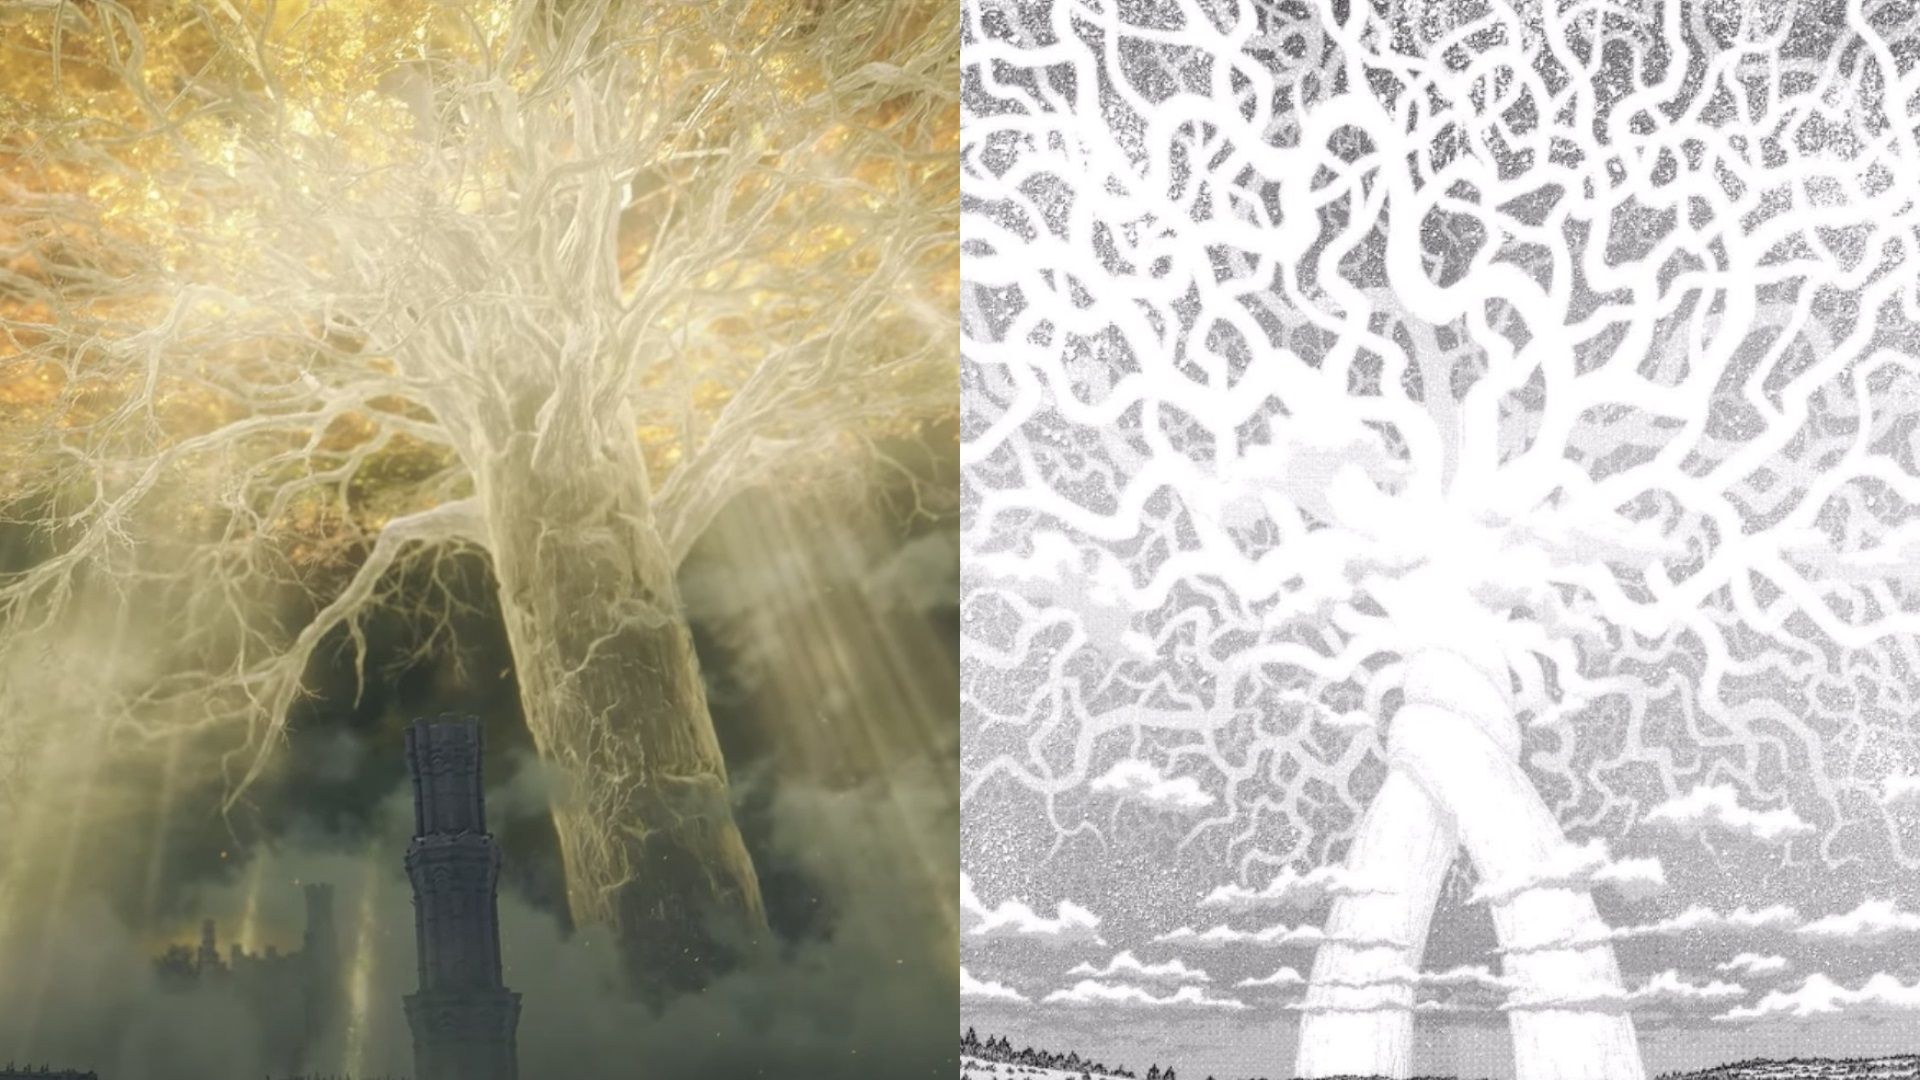 It is so cool that Miyazaki uses Berserk references all day long